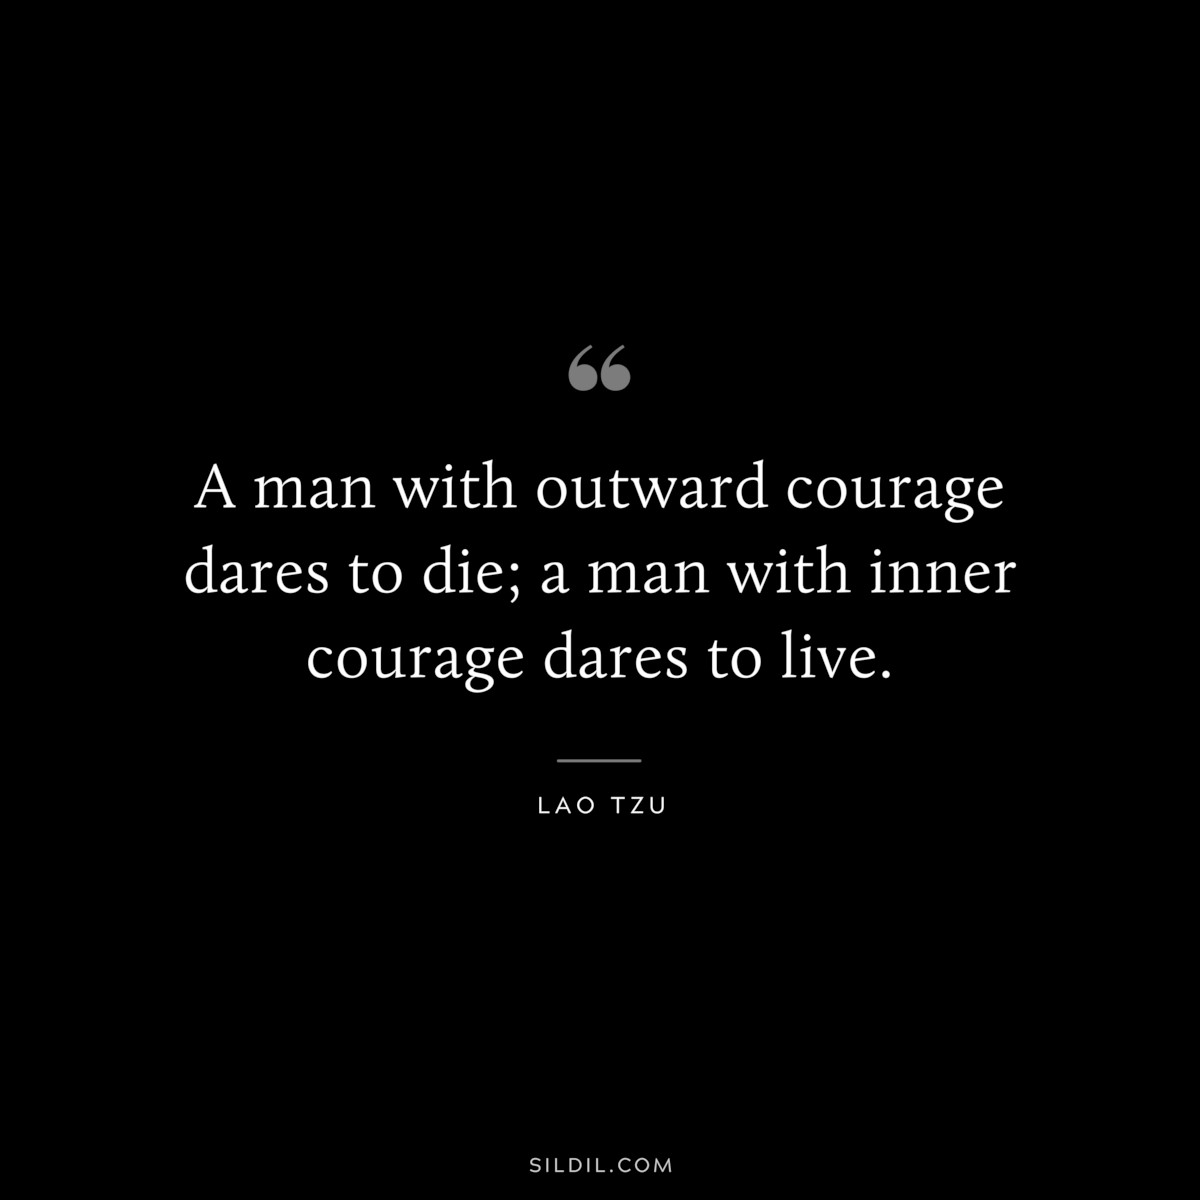 A man with outward courage dares to die; a man with inner courage dares to live. ― Lao Tzu